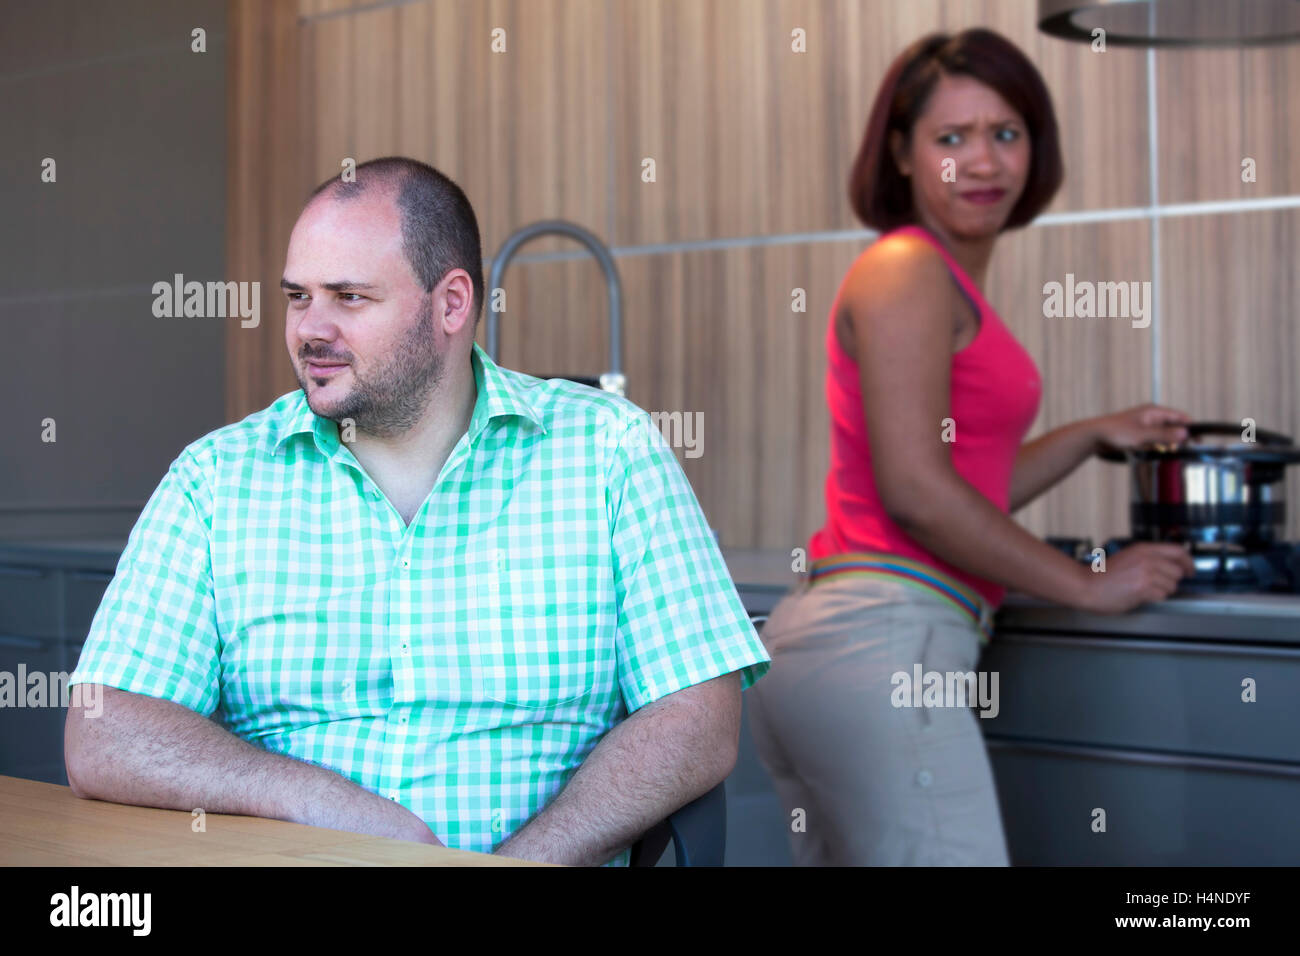 overweight man is sitting at kitchen table and hispanic woman is cooking and looking angry Stock Photo